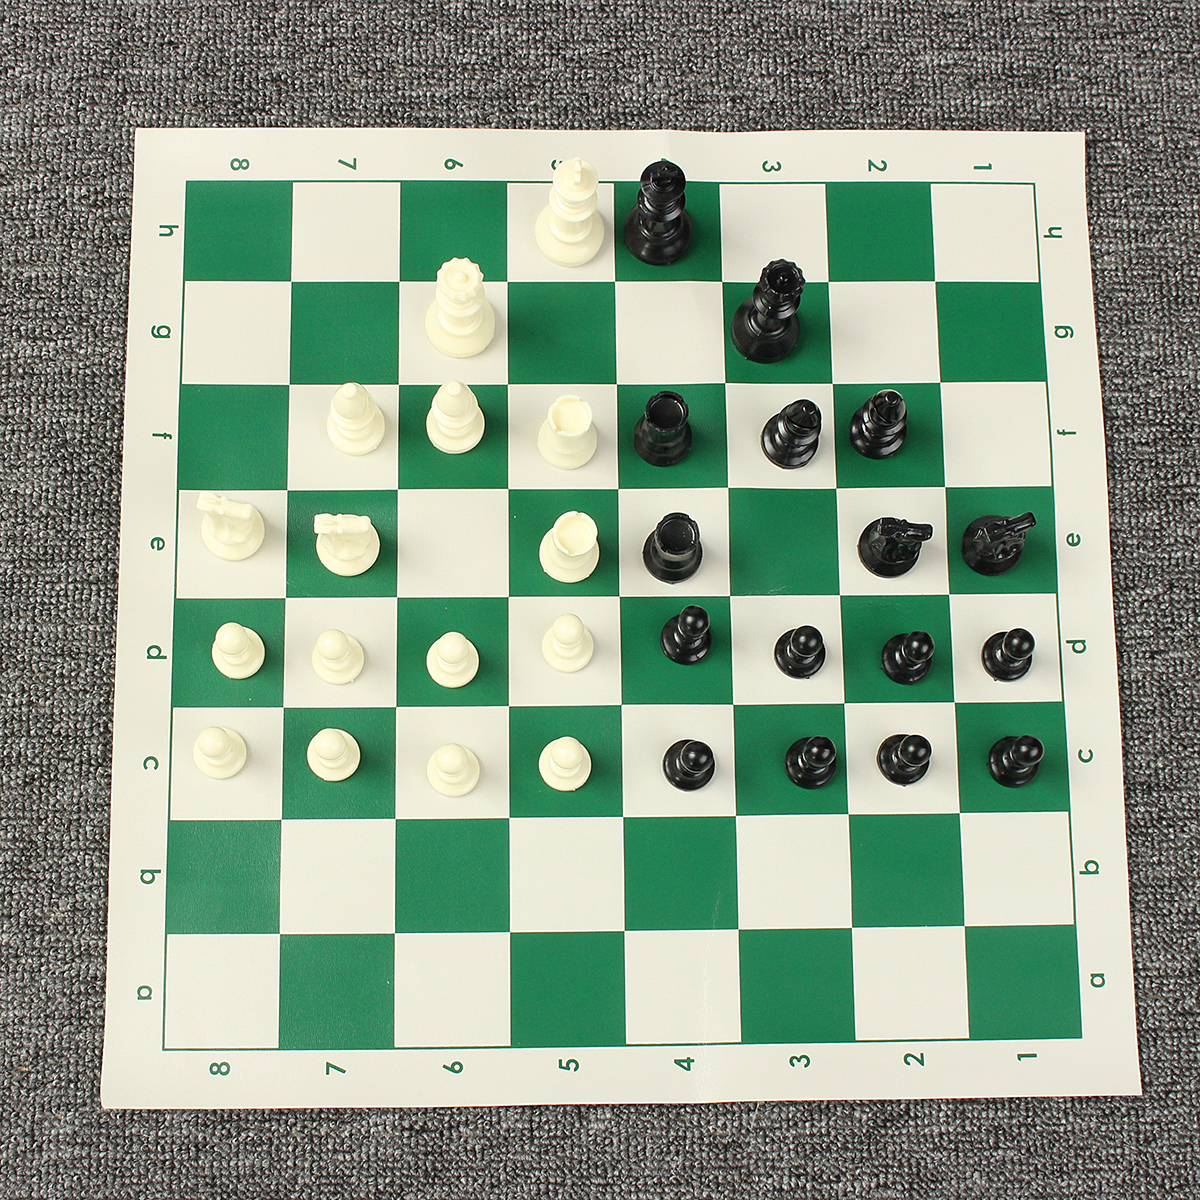 Plastic-Gambit-Tournament-Chess-Set-Roll-up-Mat-And-Bag-Camping-Travel-Gifts-Portable-Travelling-New-1641520-2